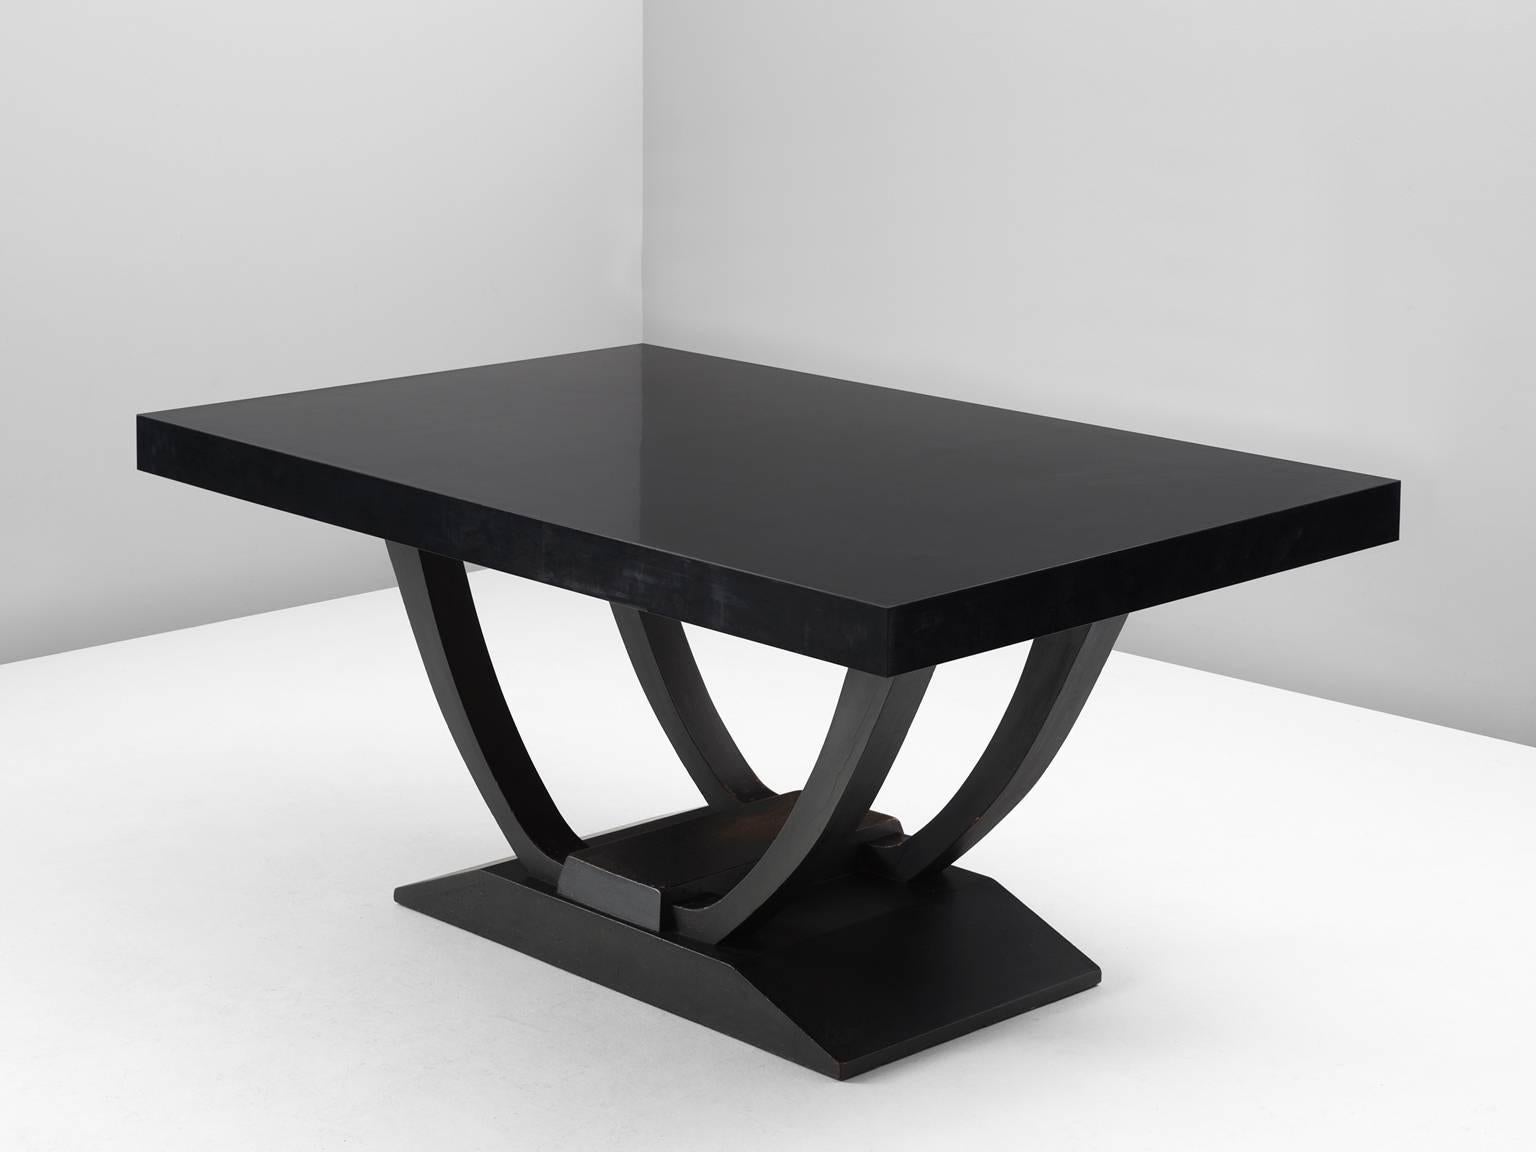 Dining table, in oak and walnut, Europe, 1930s. 

Art Deco center table with beautiful sculptural base. This ebonized table has a square base with sloping sides. The legs are two arch shaped curves. The table's top is rectangular and made of black